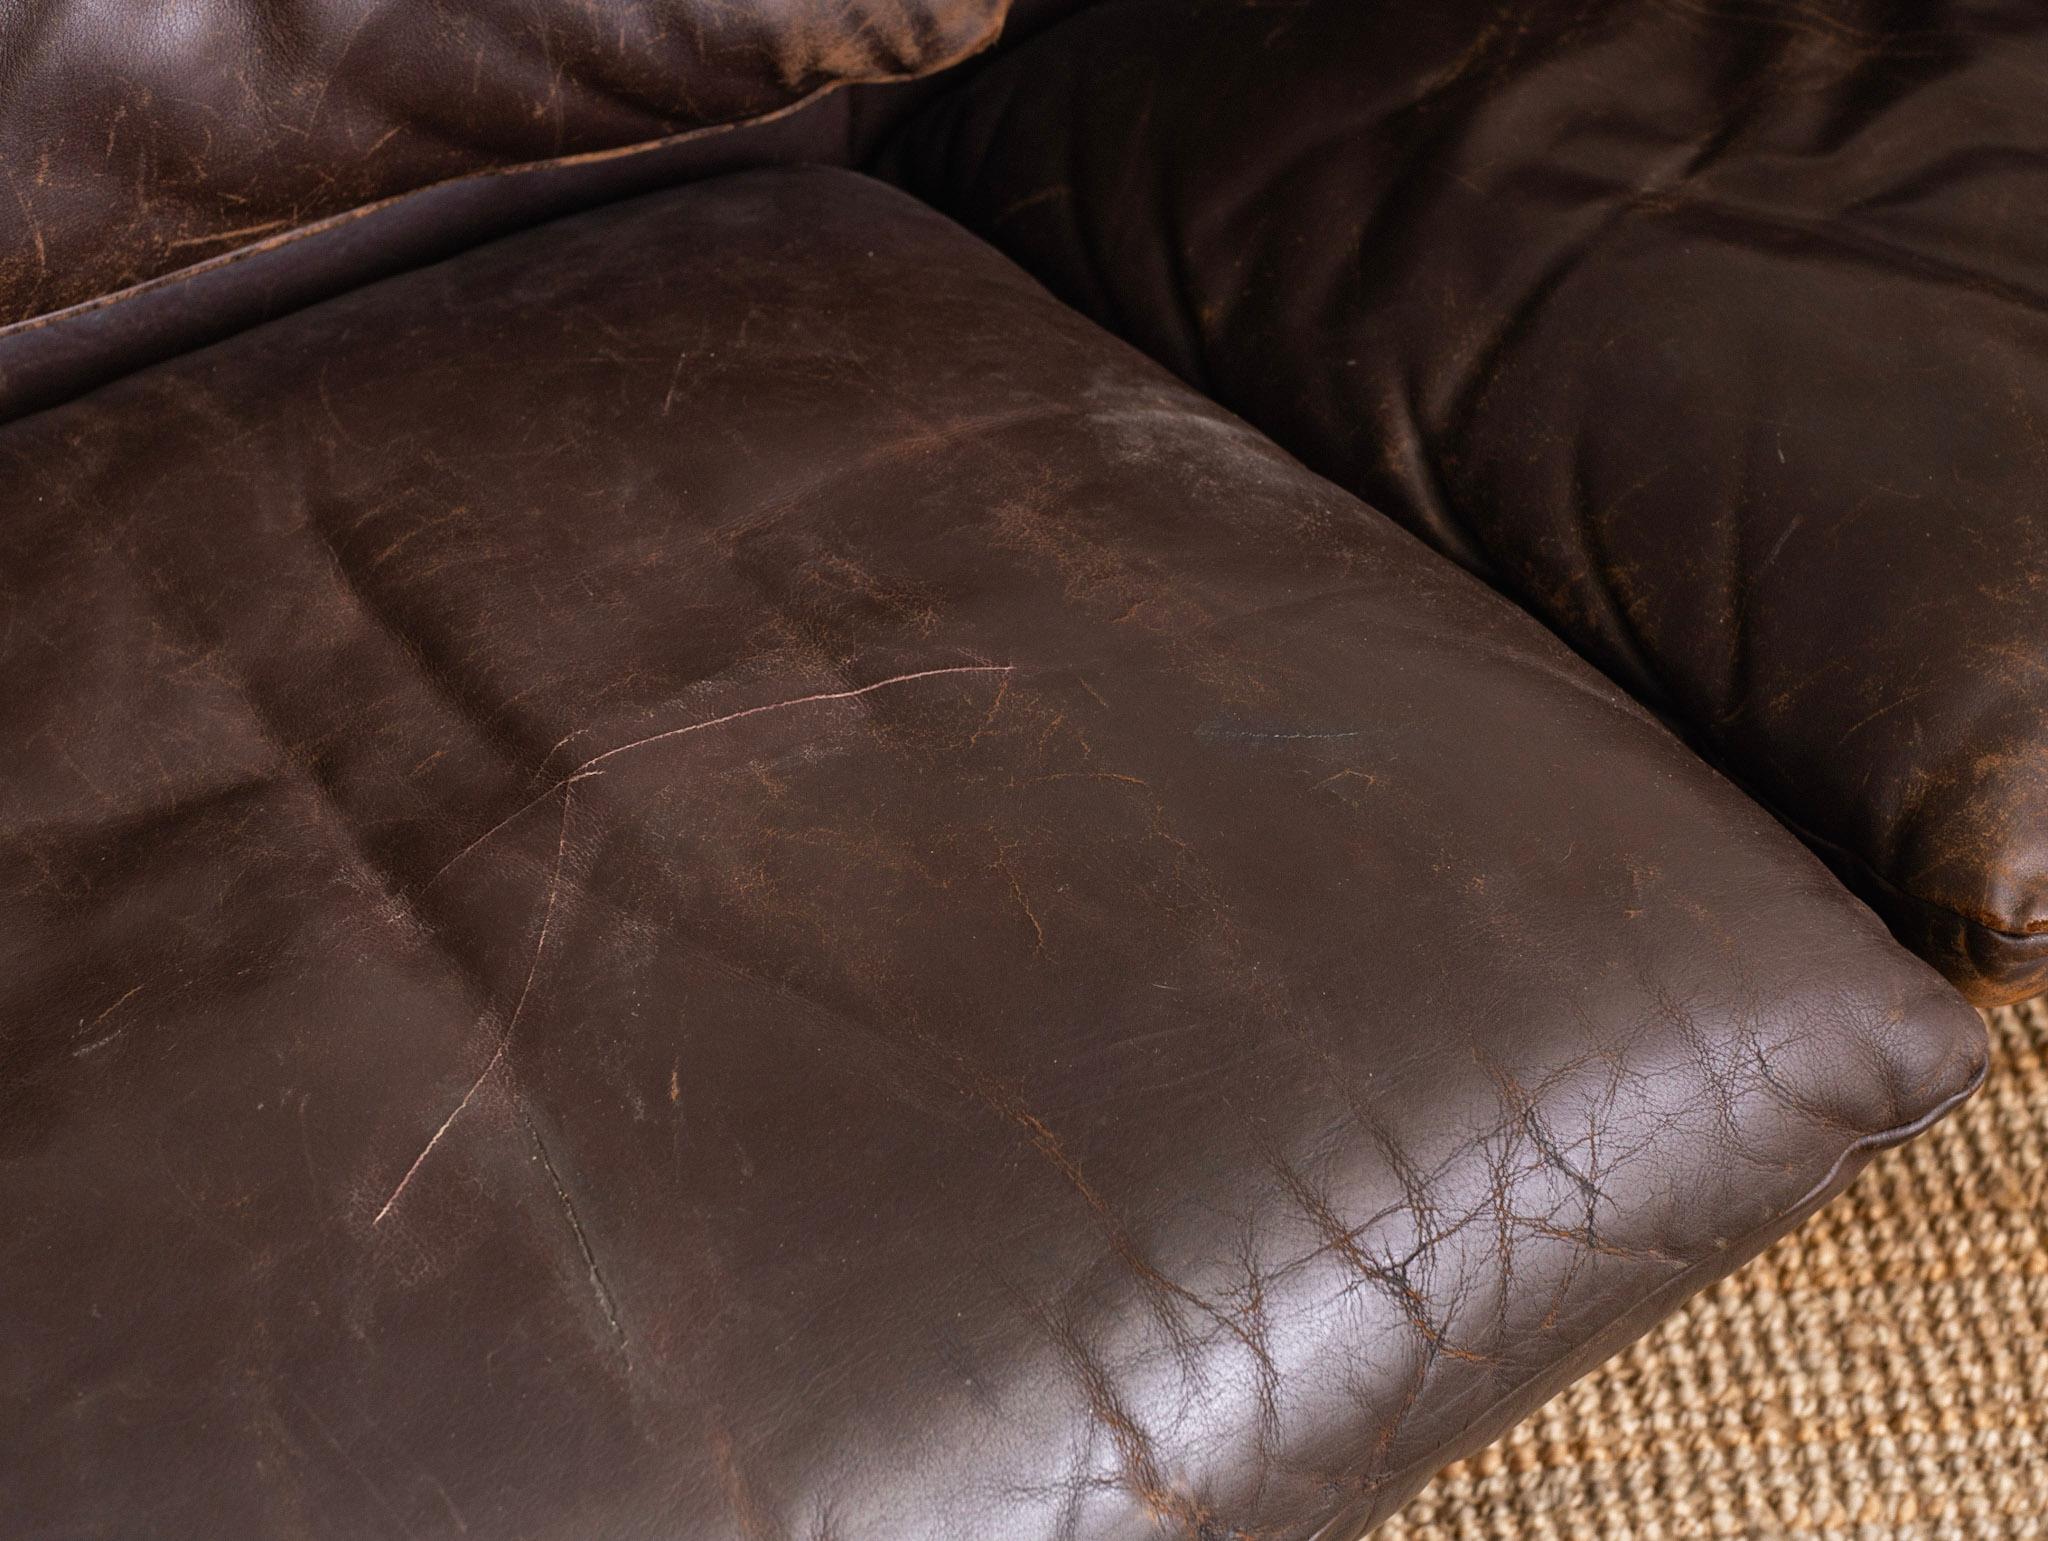 20th Century Maralunga 3 Seat Sofa by Vico Magistretti for Cassina in Chocolate Brown Leather